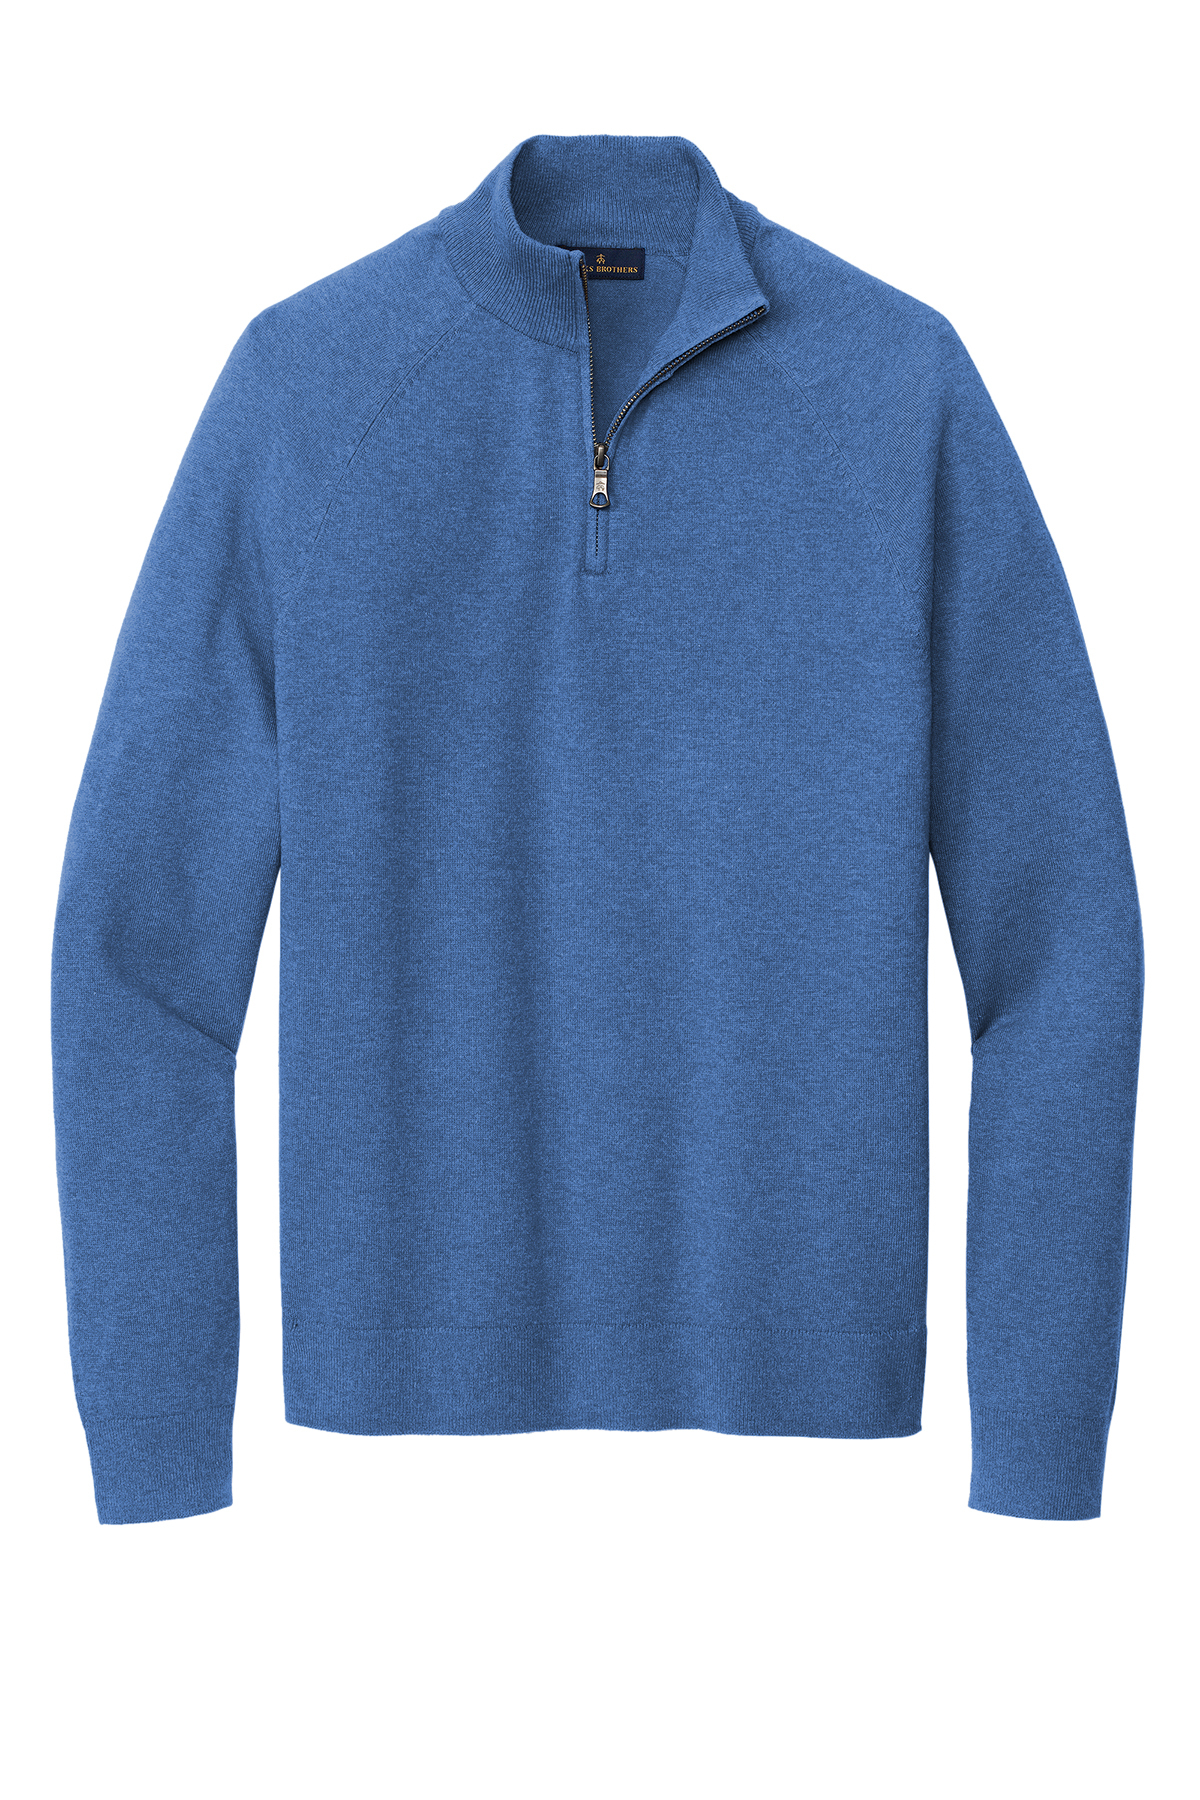 Brooks Brothers Cotton Stretch 1/4-Zip Sweater | Product | SanMar